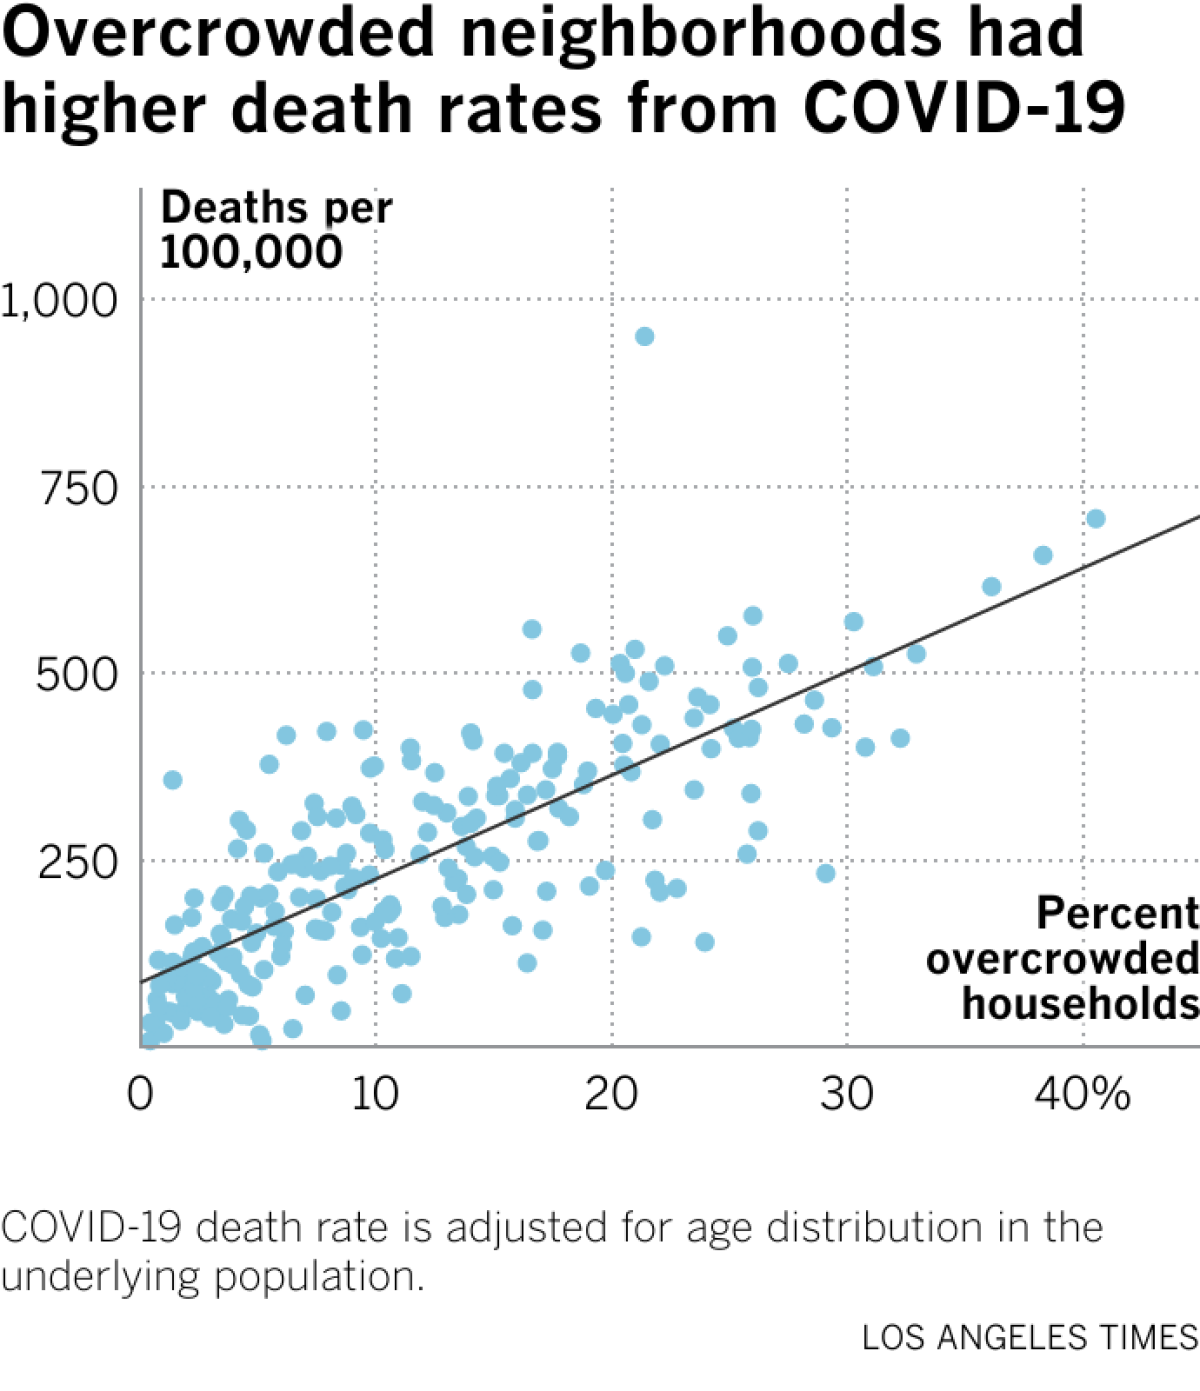 Overcrowded neighborhoods had higher death rates from COVID-19